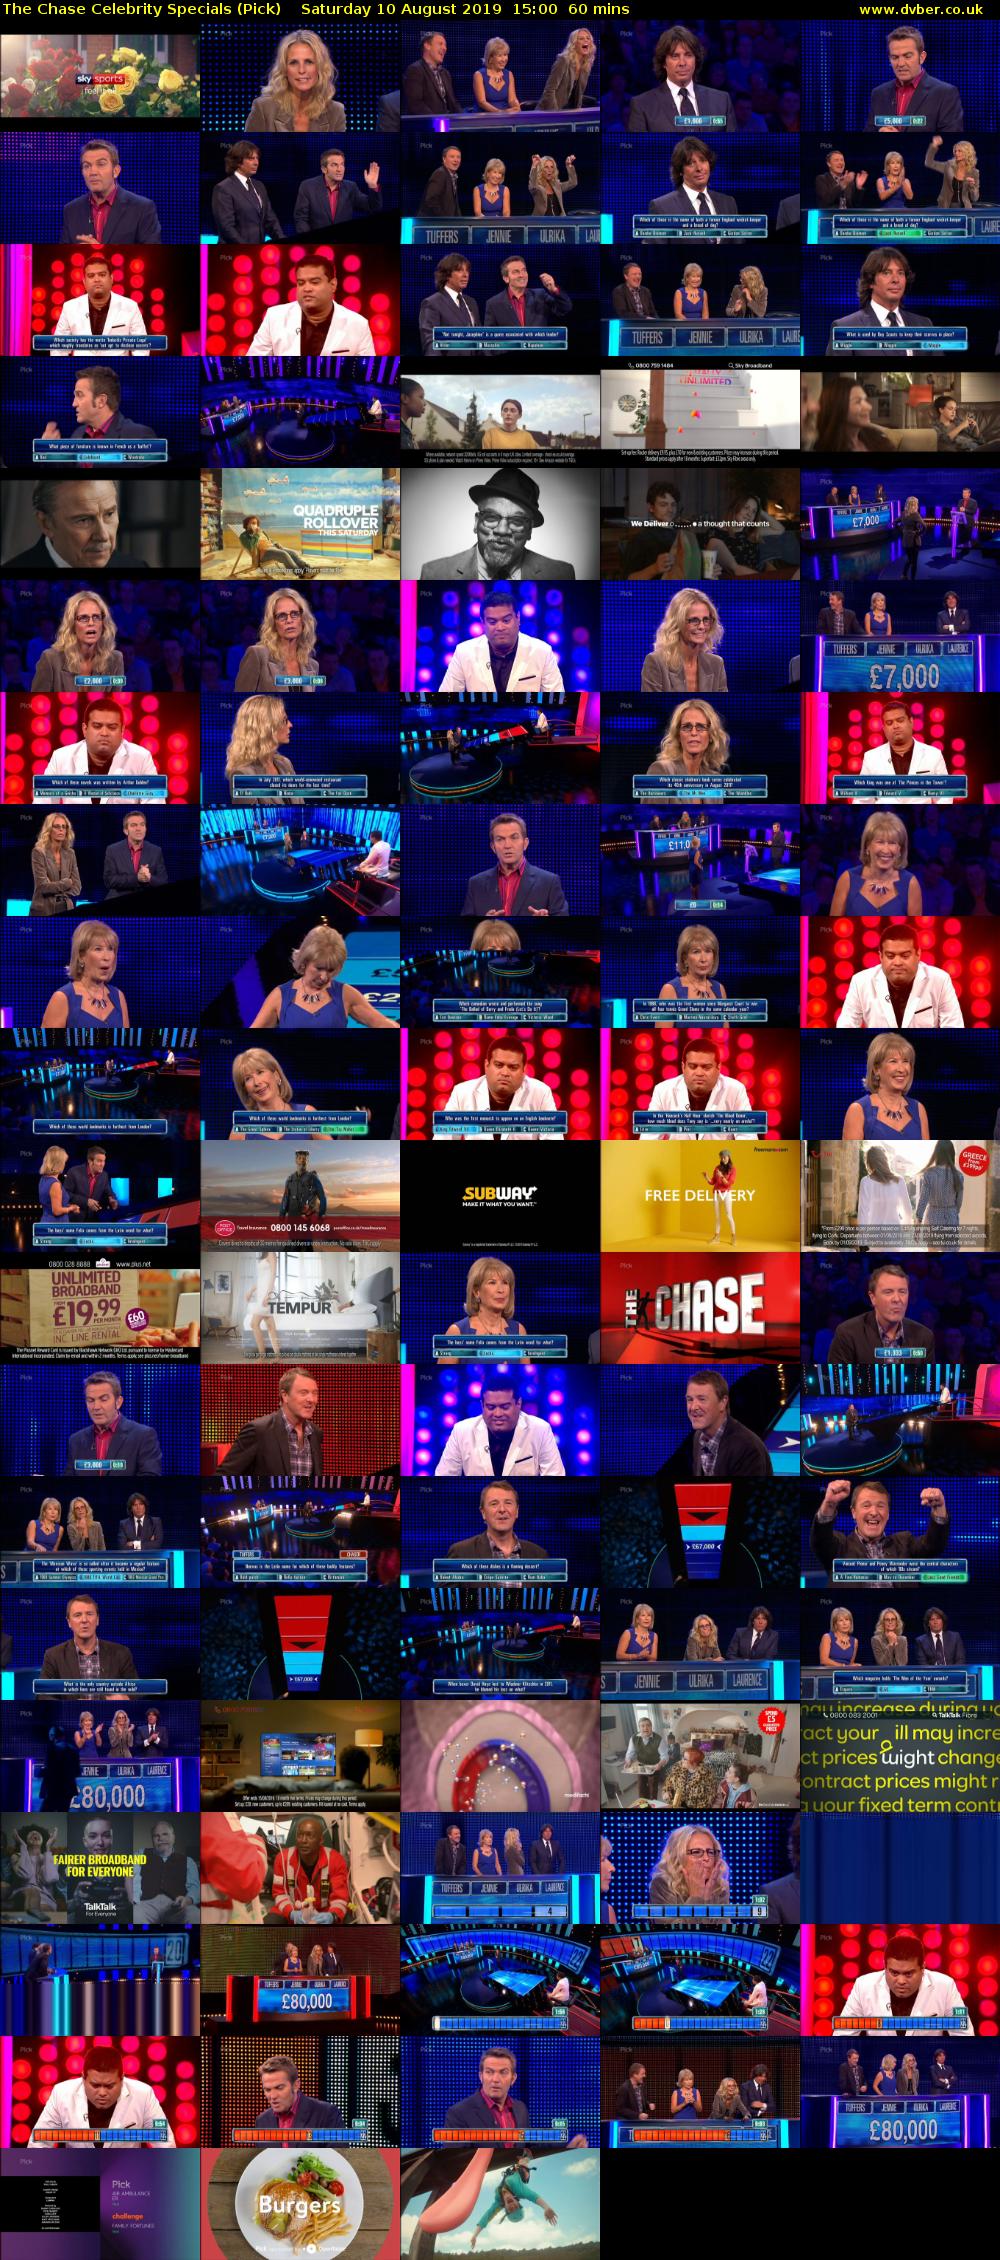 The Chase Celebrity Specials (Pick) Saturday 10 August 2019 15:00 - 16:00